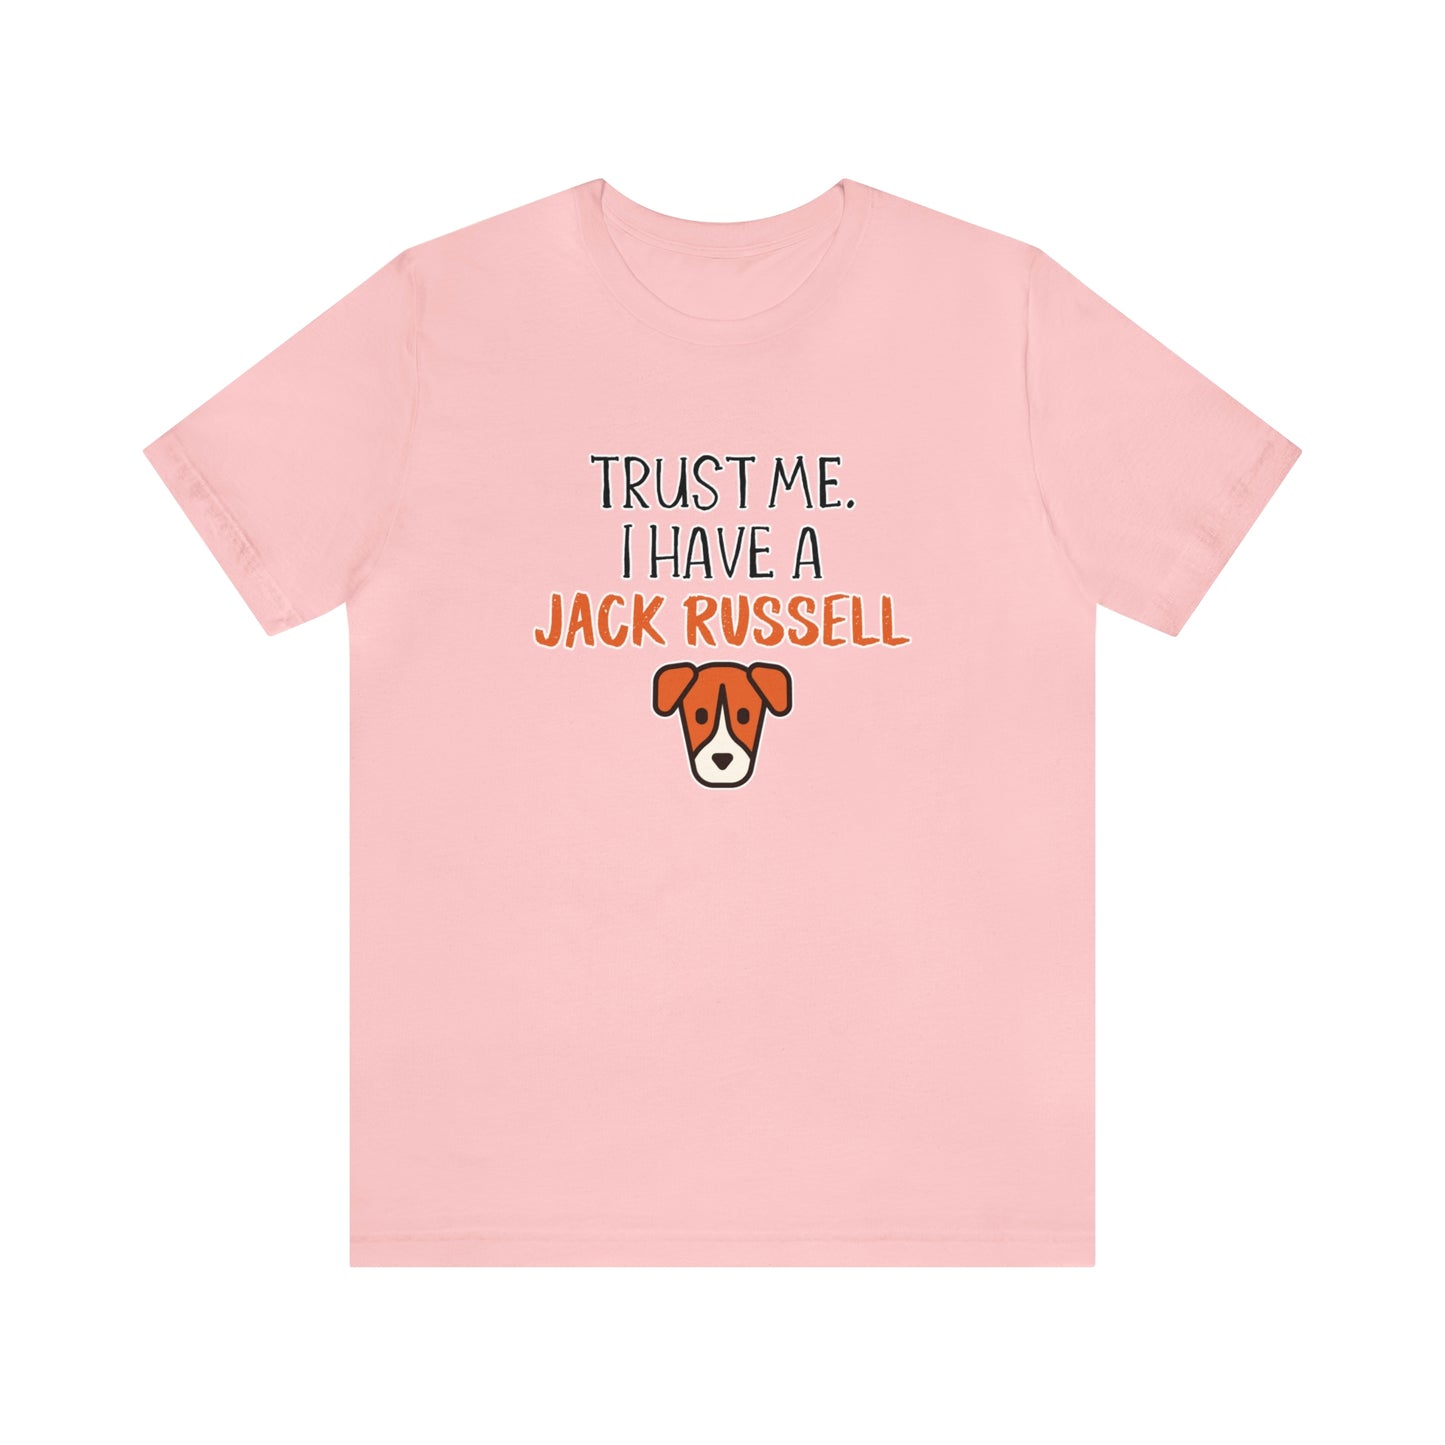 jack russell t shirt pink